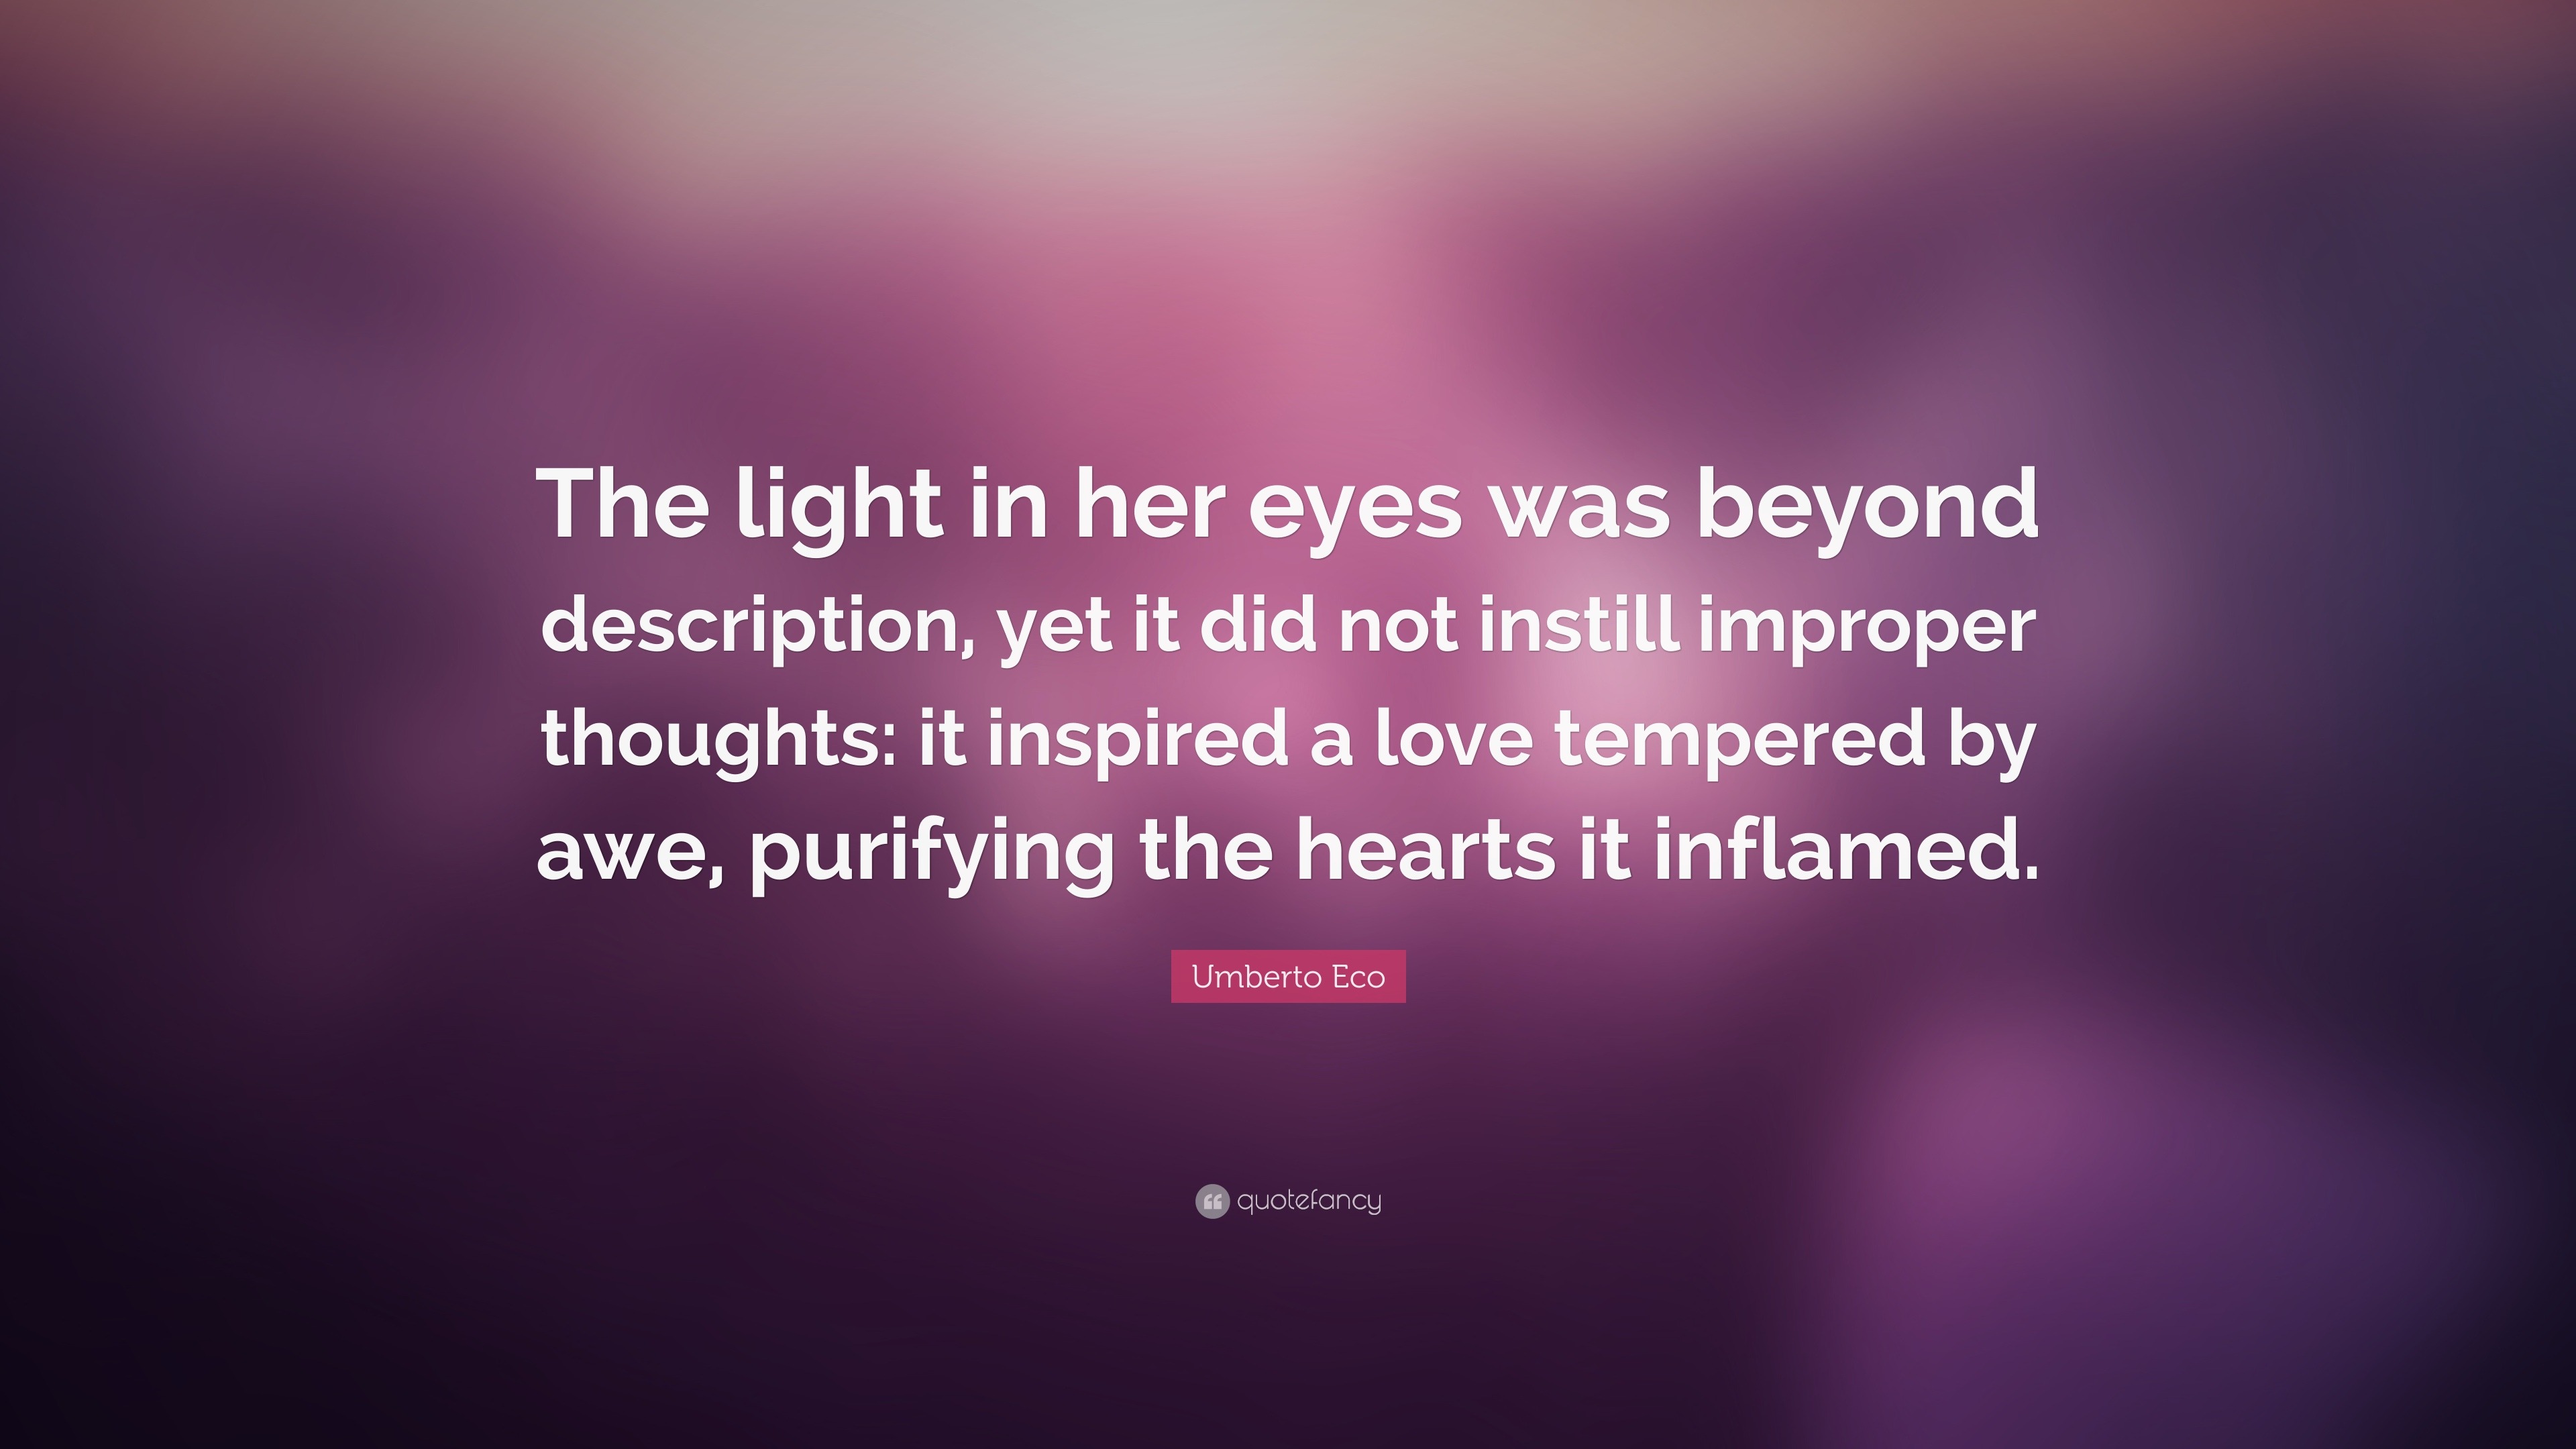 Umberto Eco Quote: “The light in her eyes was beyond description, yet did not instill thoughts: inspired a love tempered by a...”